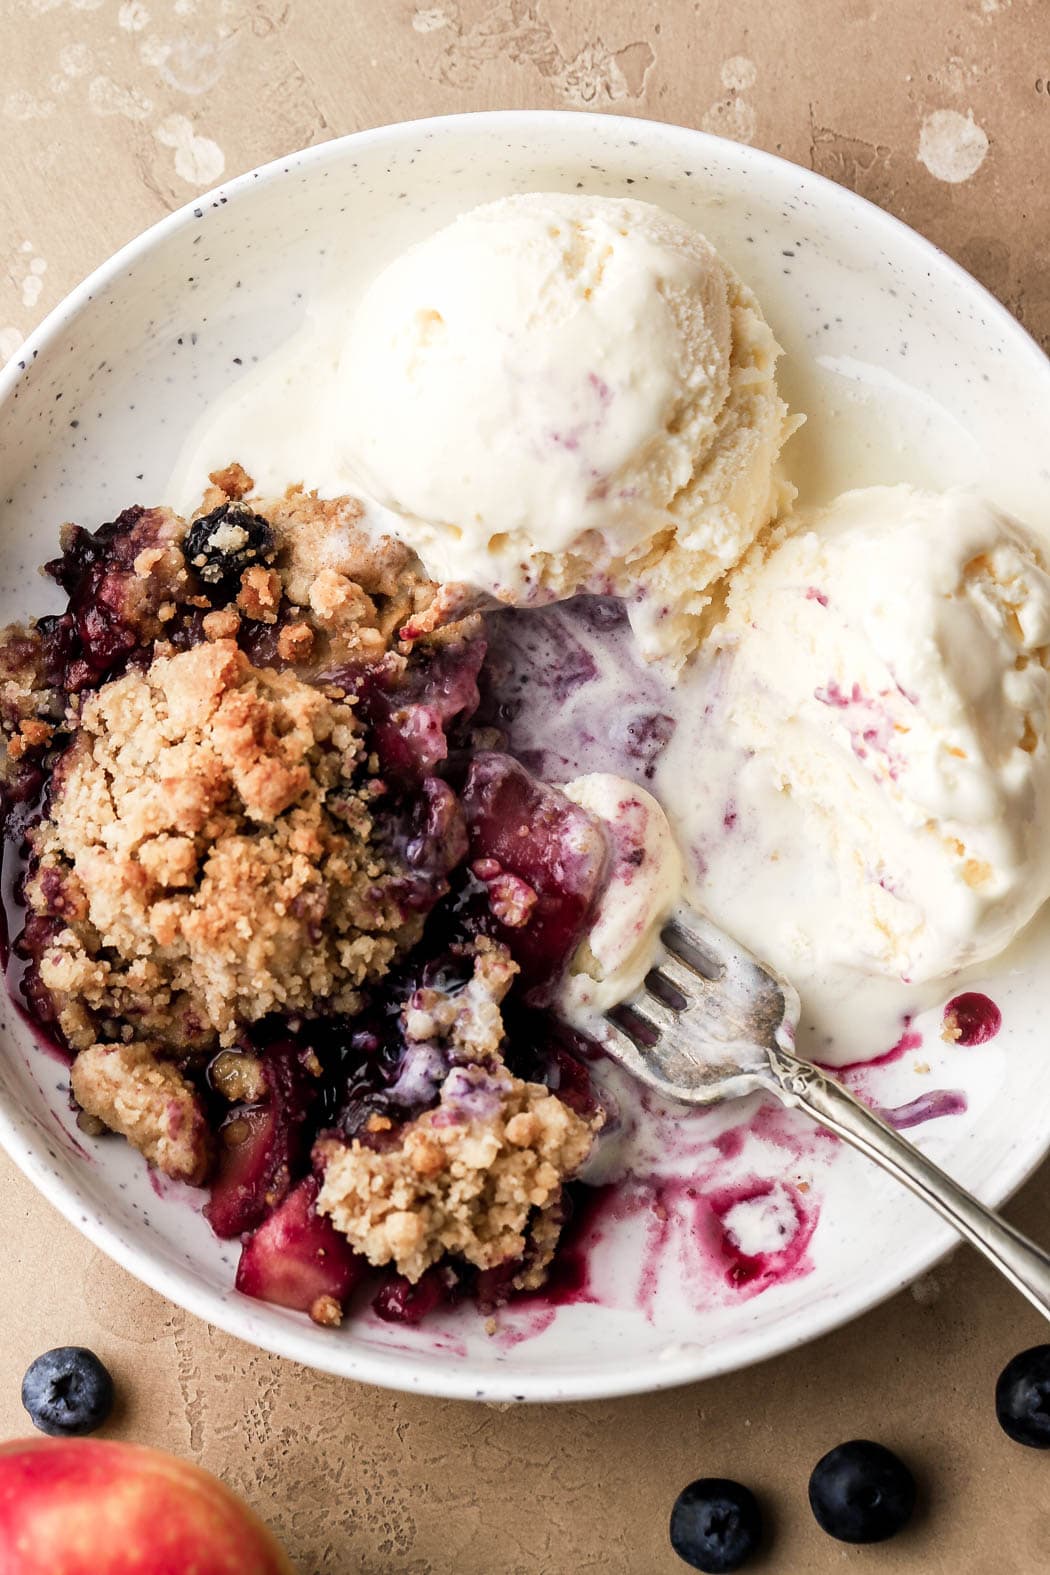 blueberries and apples with streusel topping and vanilla ice cream